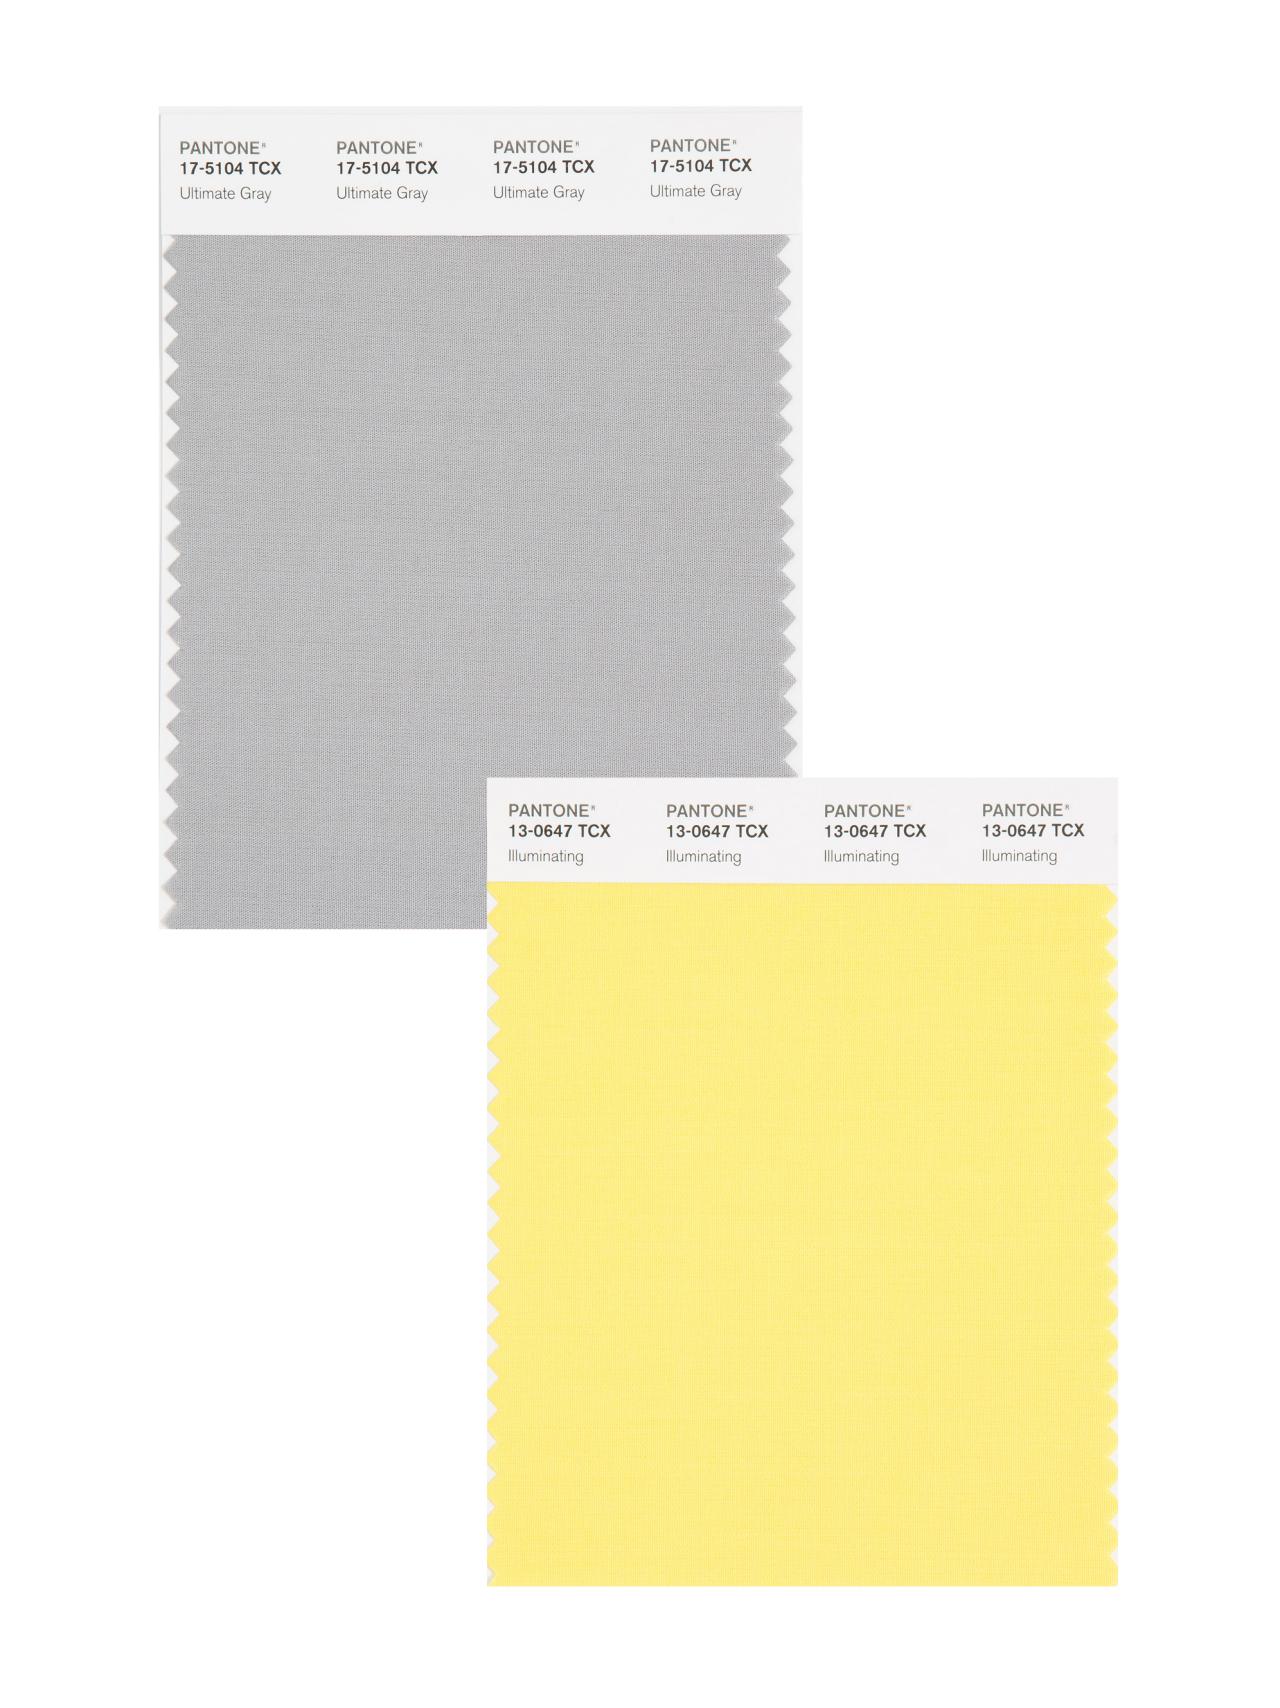 Pantone Announces Ultimate Gray and Illuminating as 2021 Colors of the